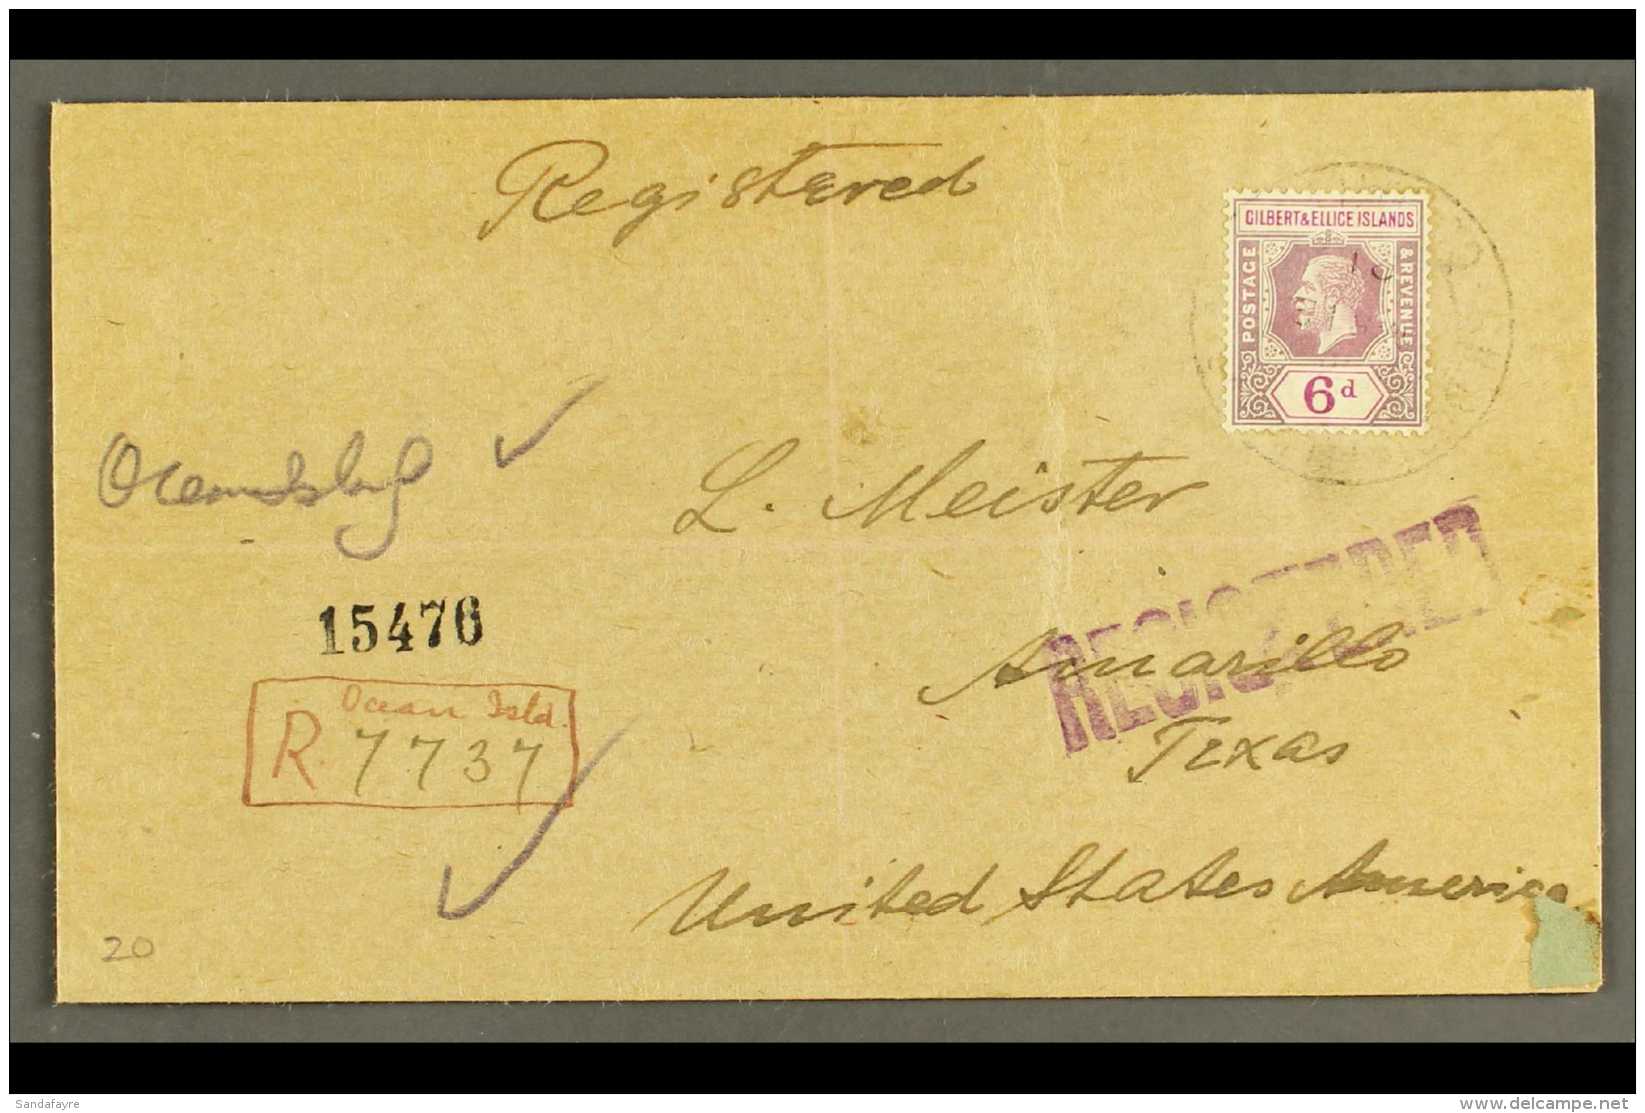 OCEAN ISLAND 1924 Registered Cover To USA, Bearing KGV 6d, Cancelled By "G.P.O. Ocean Isld." Pmk, With Hand... - Îles Gilbert Et Ellice (...-1979)